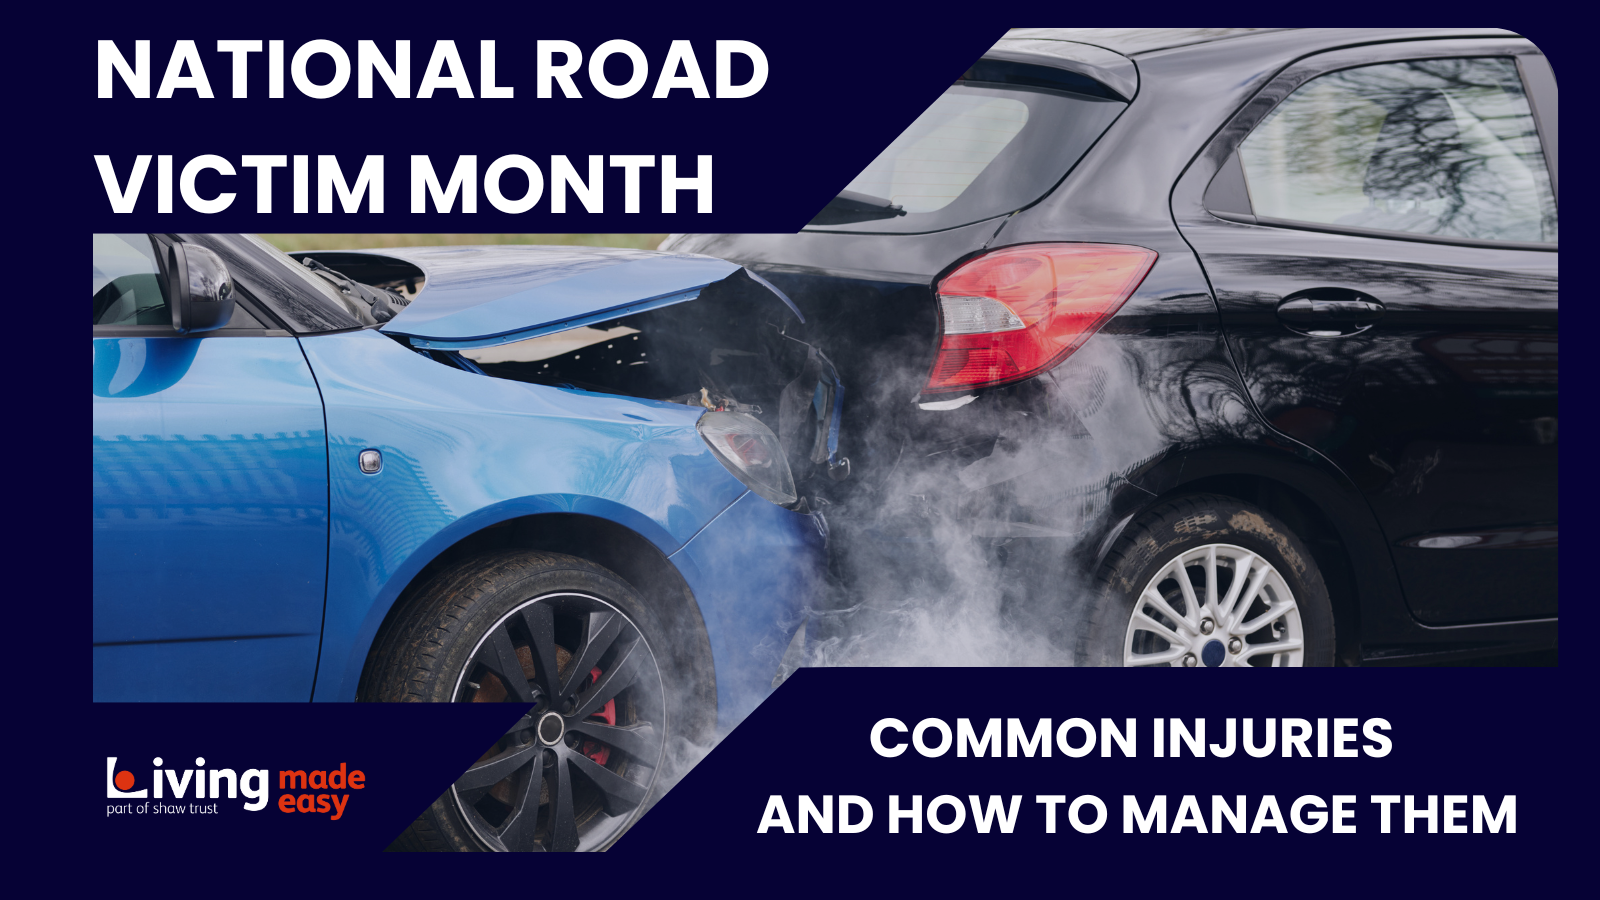 A banner image that reads National Road Victim Month, common injuries and how to manage them. The banner contains an image of a blue car which has crashed into the rear end of a black car, there is smoke coming from the cars.